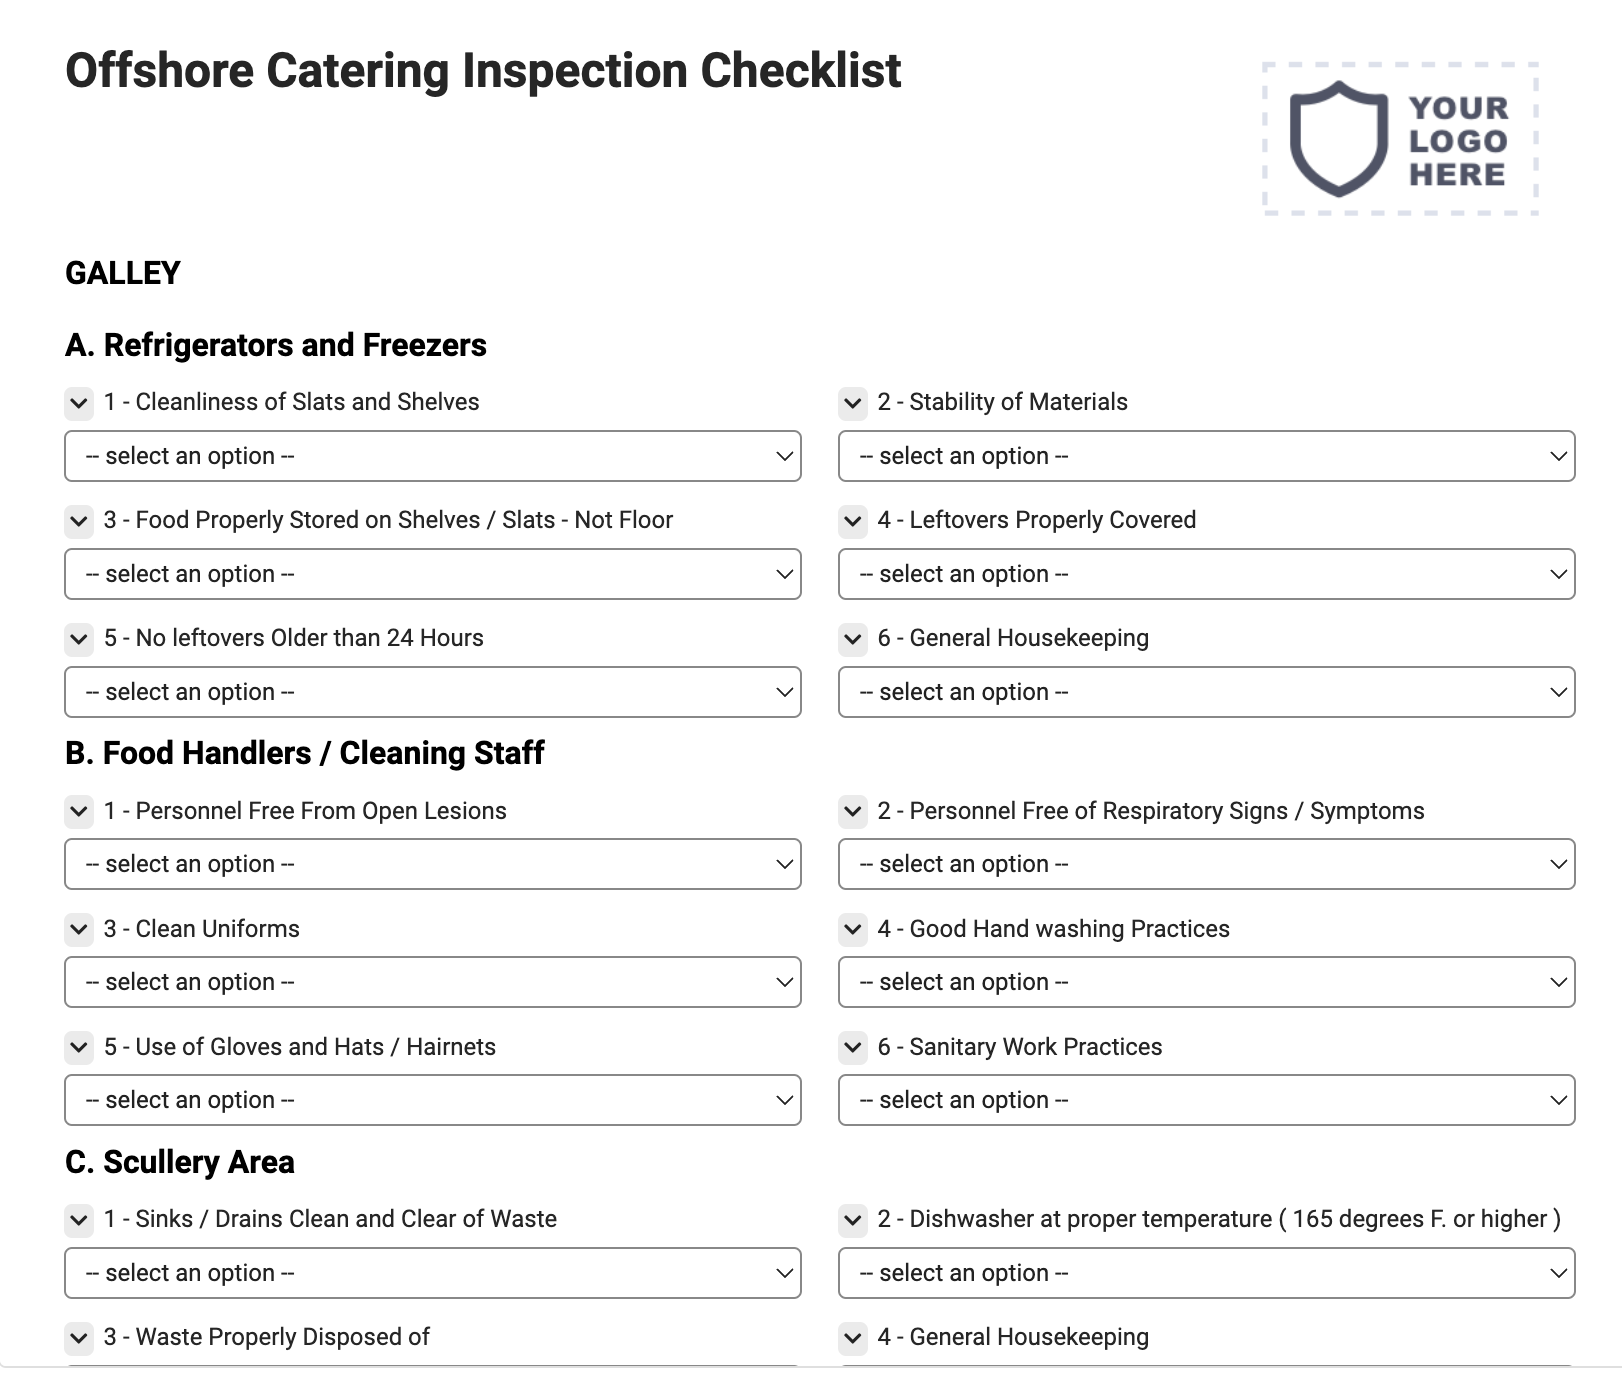 Offshore Catering Inspection Checklist